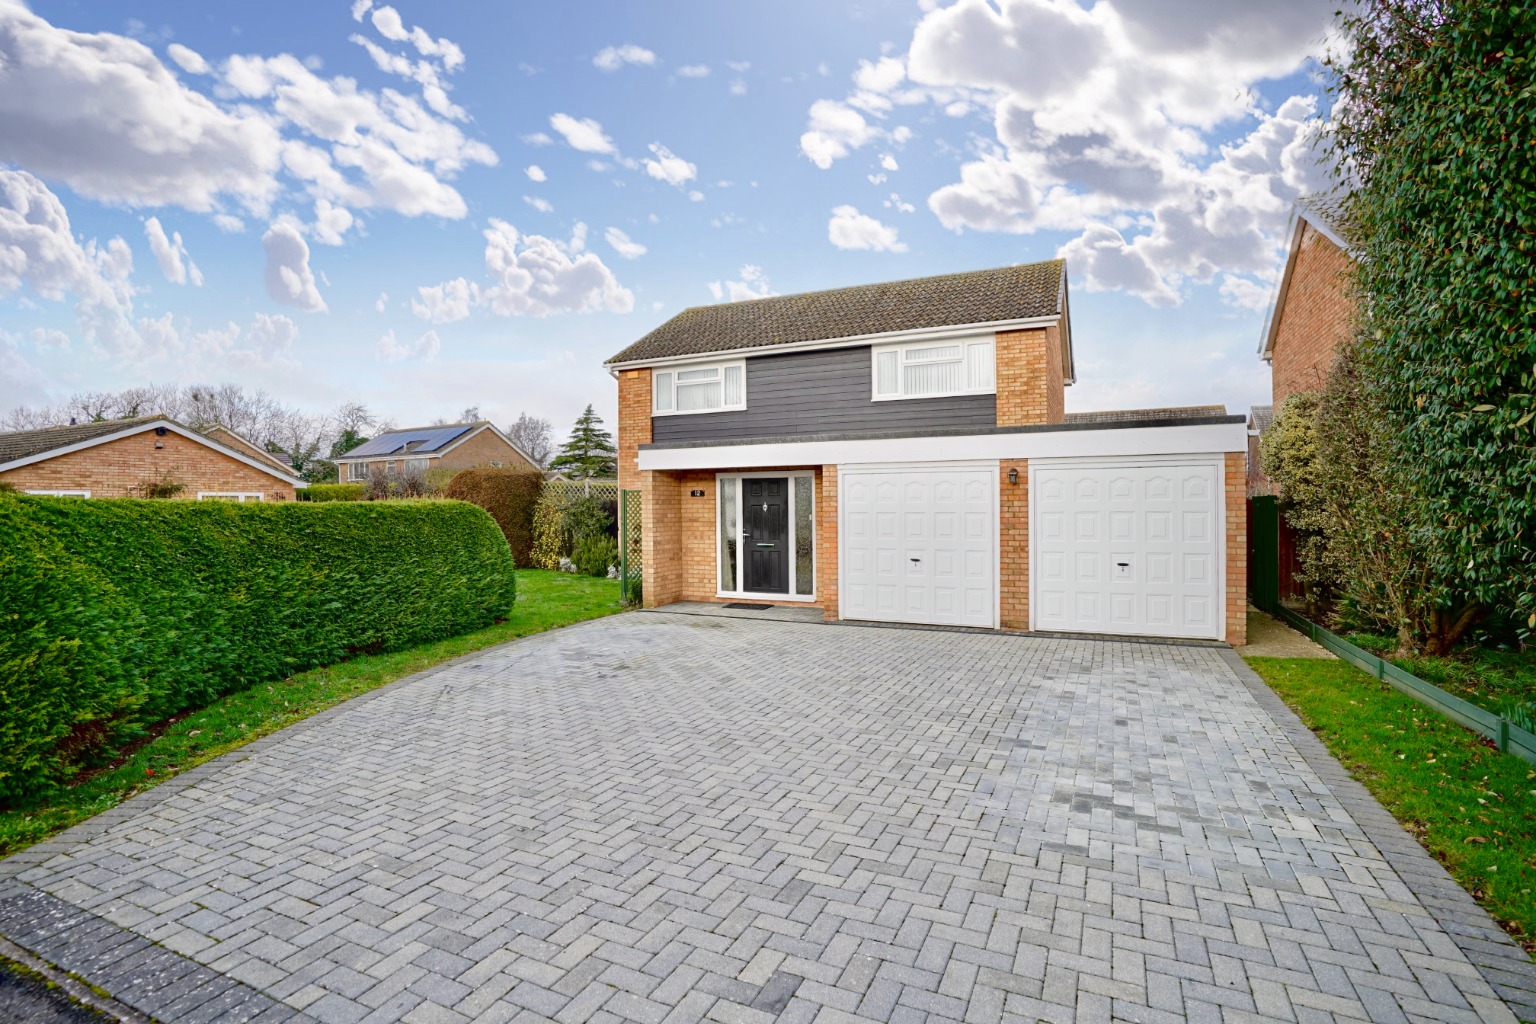 4 bed detached house for sale in Browning Drive, St. Neots - Property Image 1